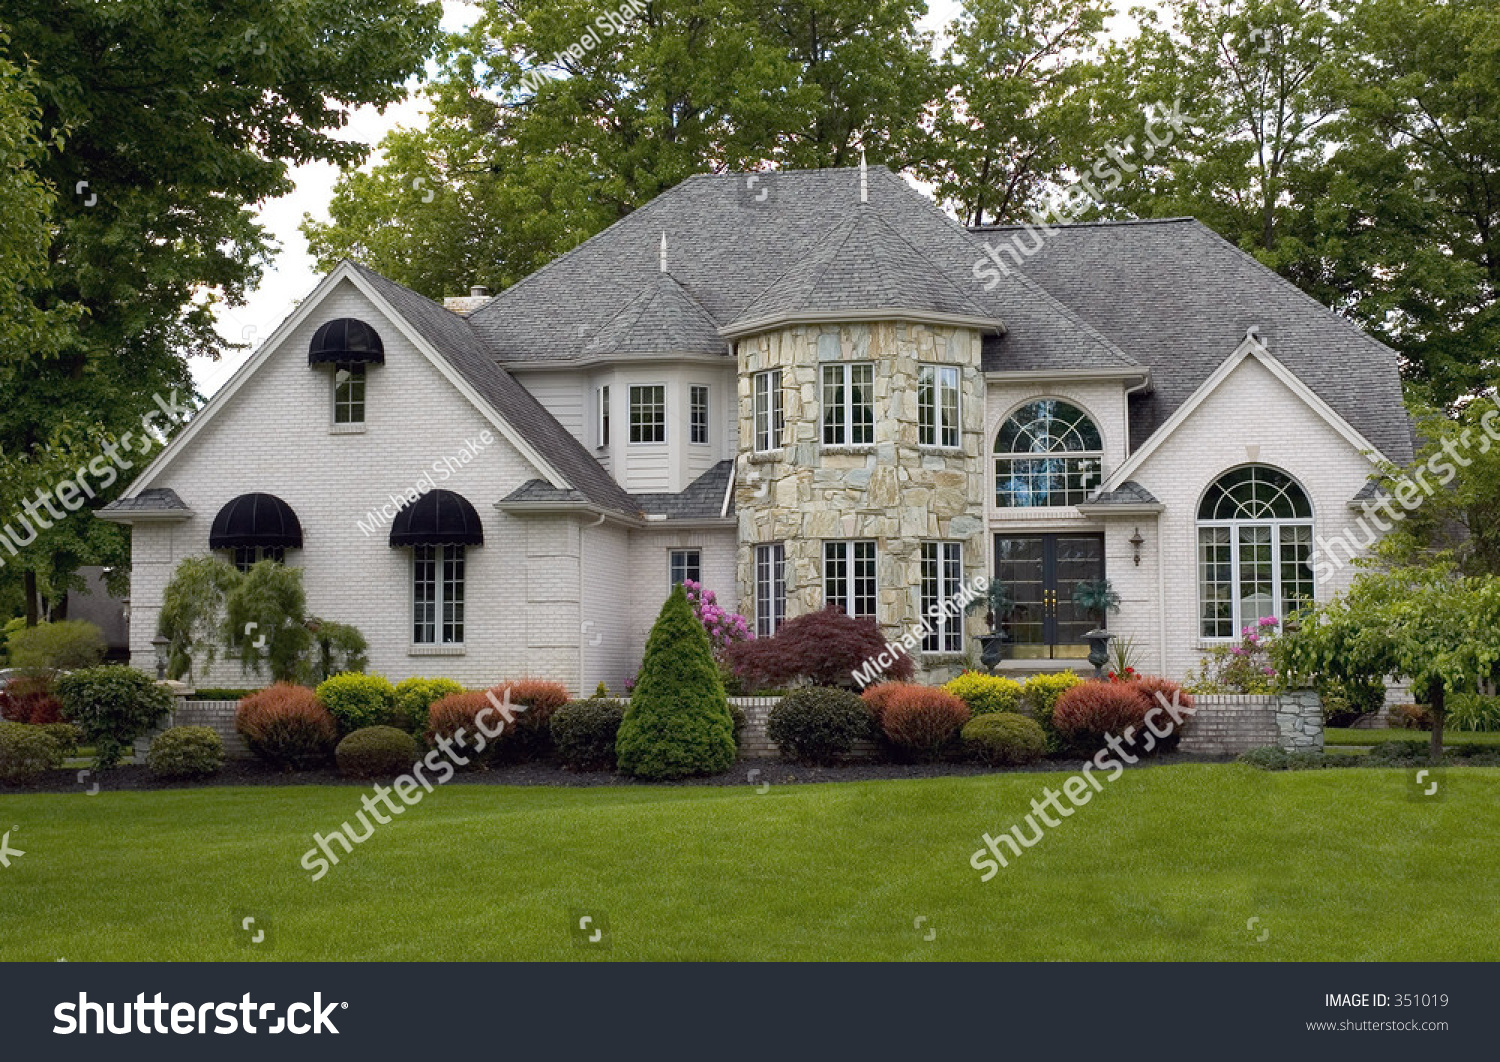 One He Most Beautiful House Have Buildings Landmarks Stock Image